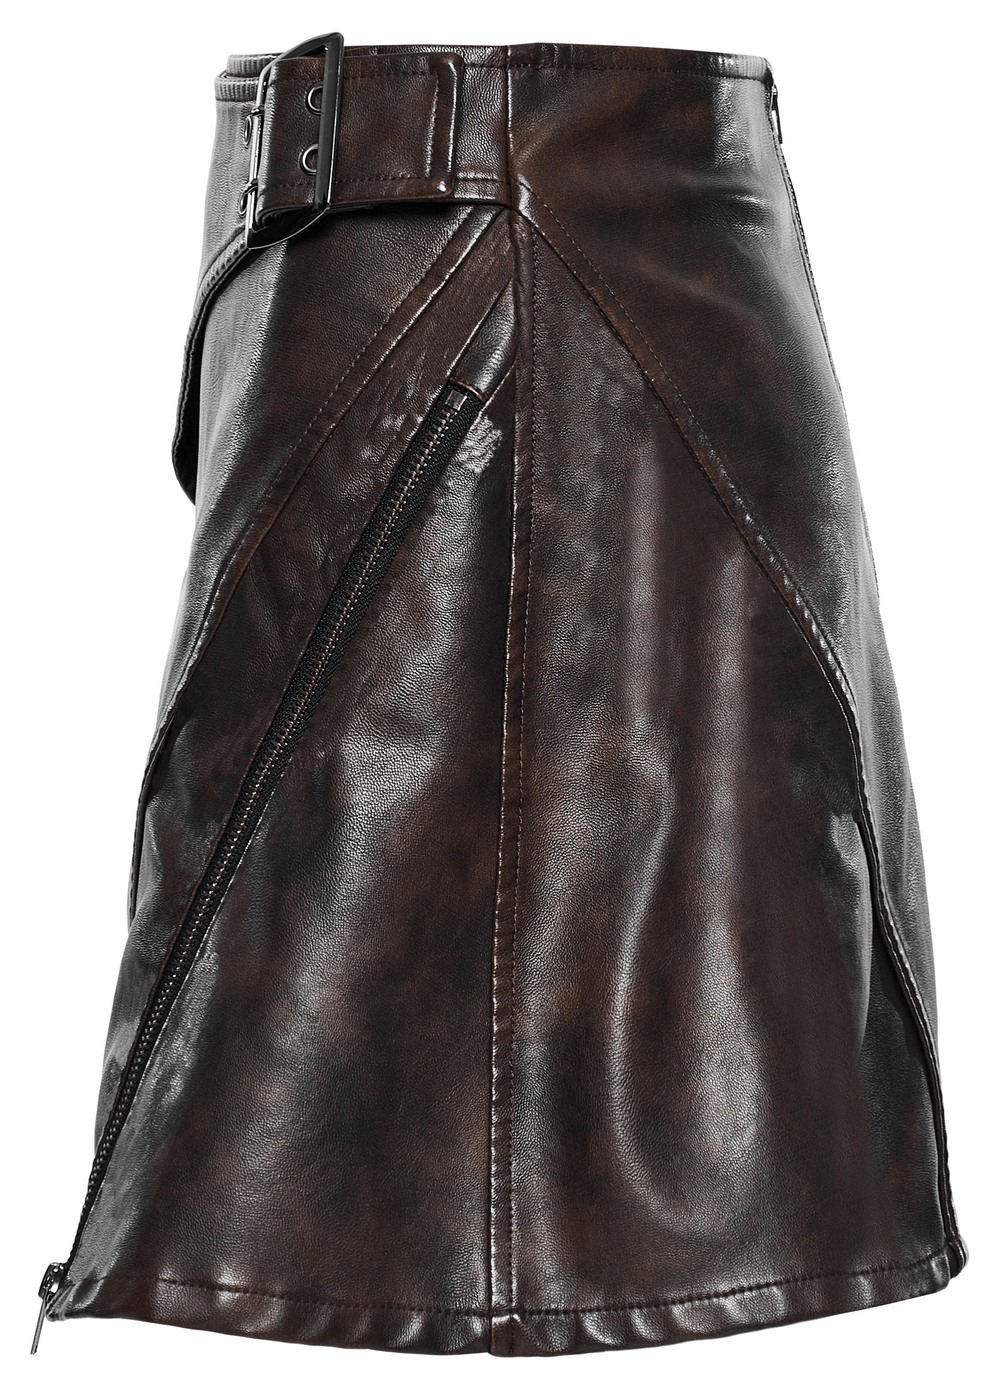 Unique Styles Leather Pencil & Alternative Skirts for Women